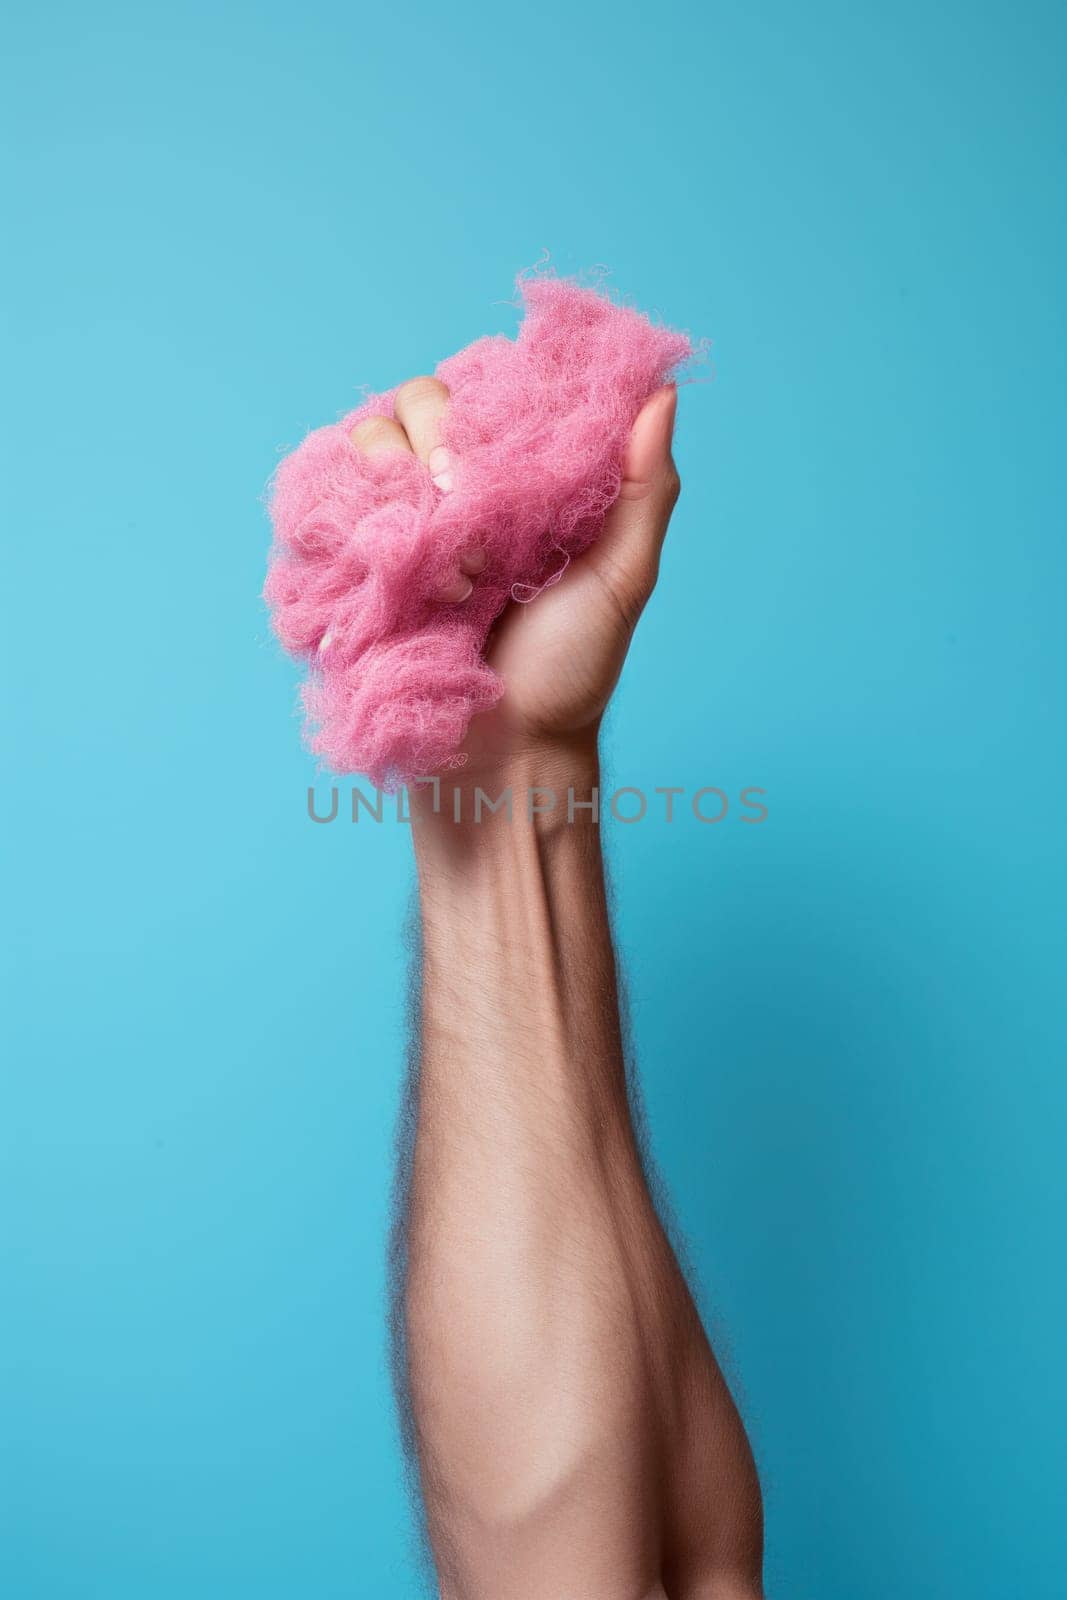 A man's arm holding a pink cotton ball in his fist